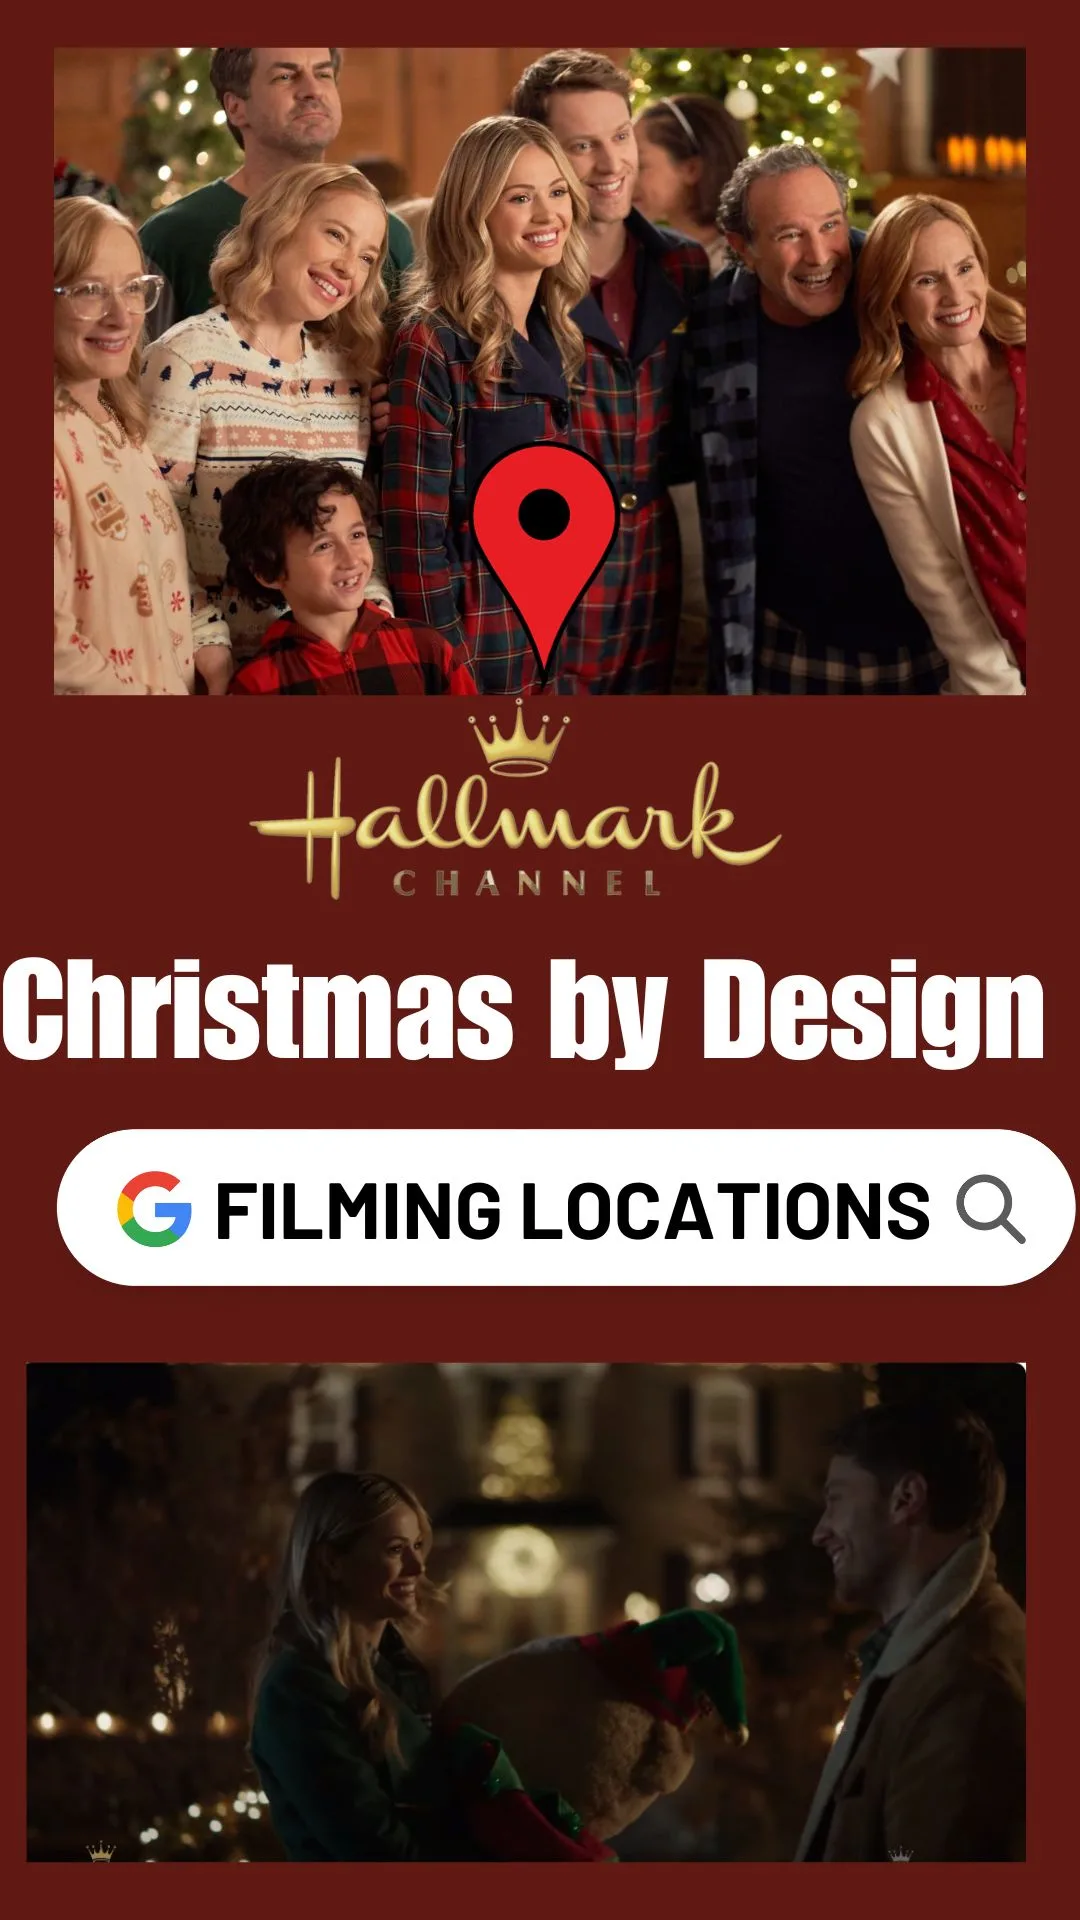 Christmas by Design Filming Locations